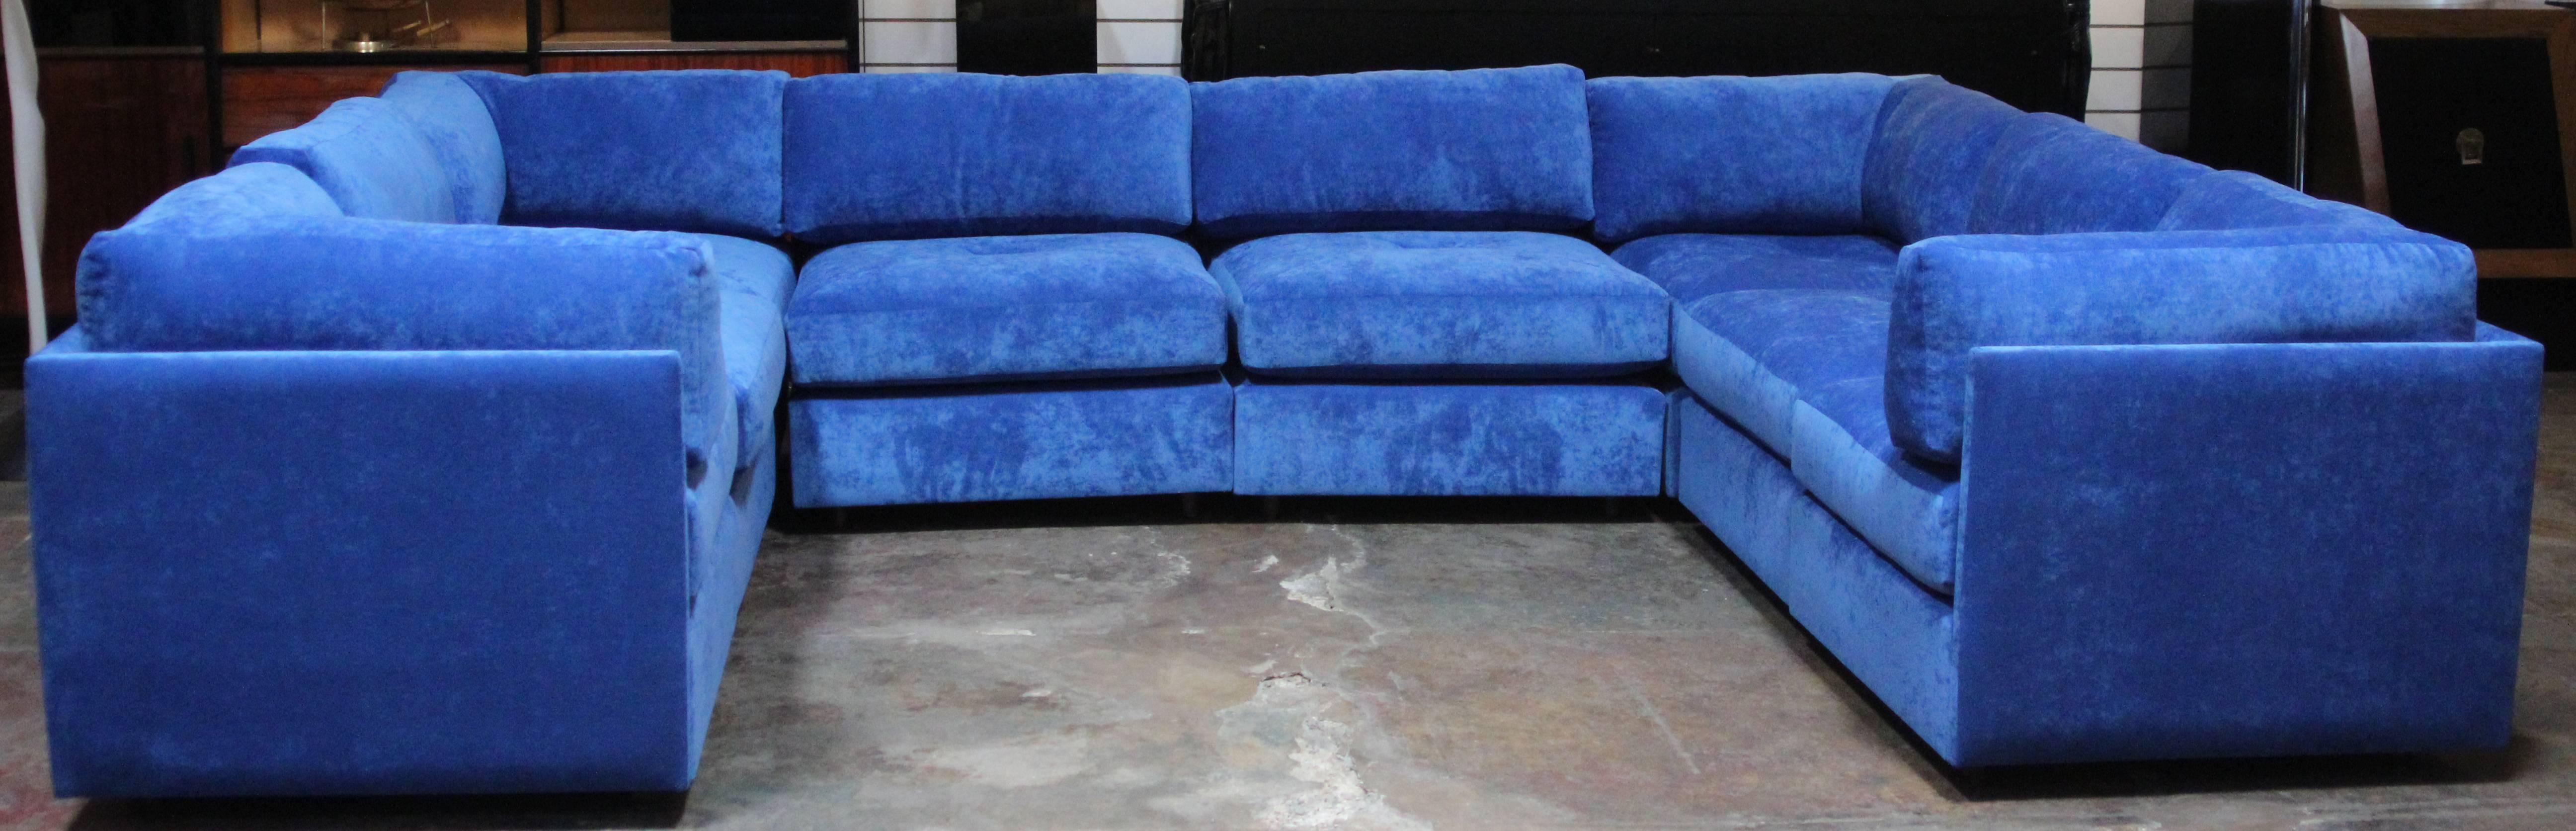 This sectional features four corner pieces, four slipper chairs and two storage ottomans.
They have been reupholstered in blue chenille.
All pieces are interchangeable and can be displayed in several different layouts as shown in